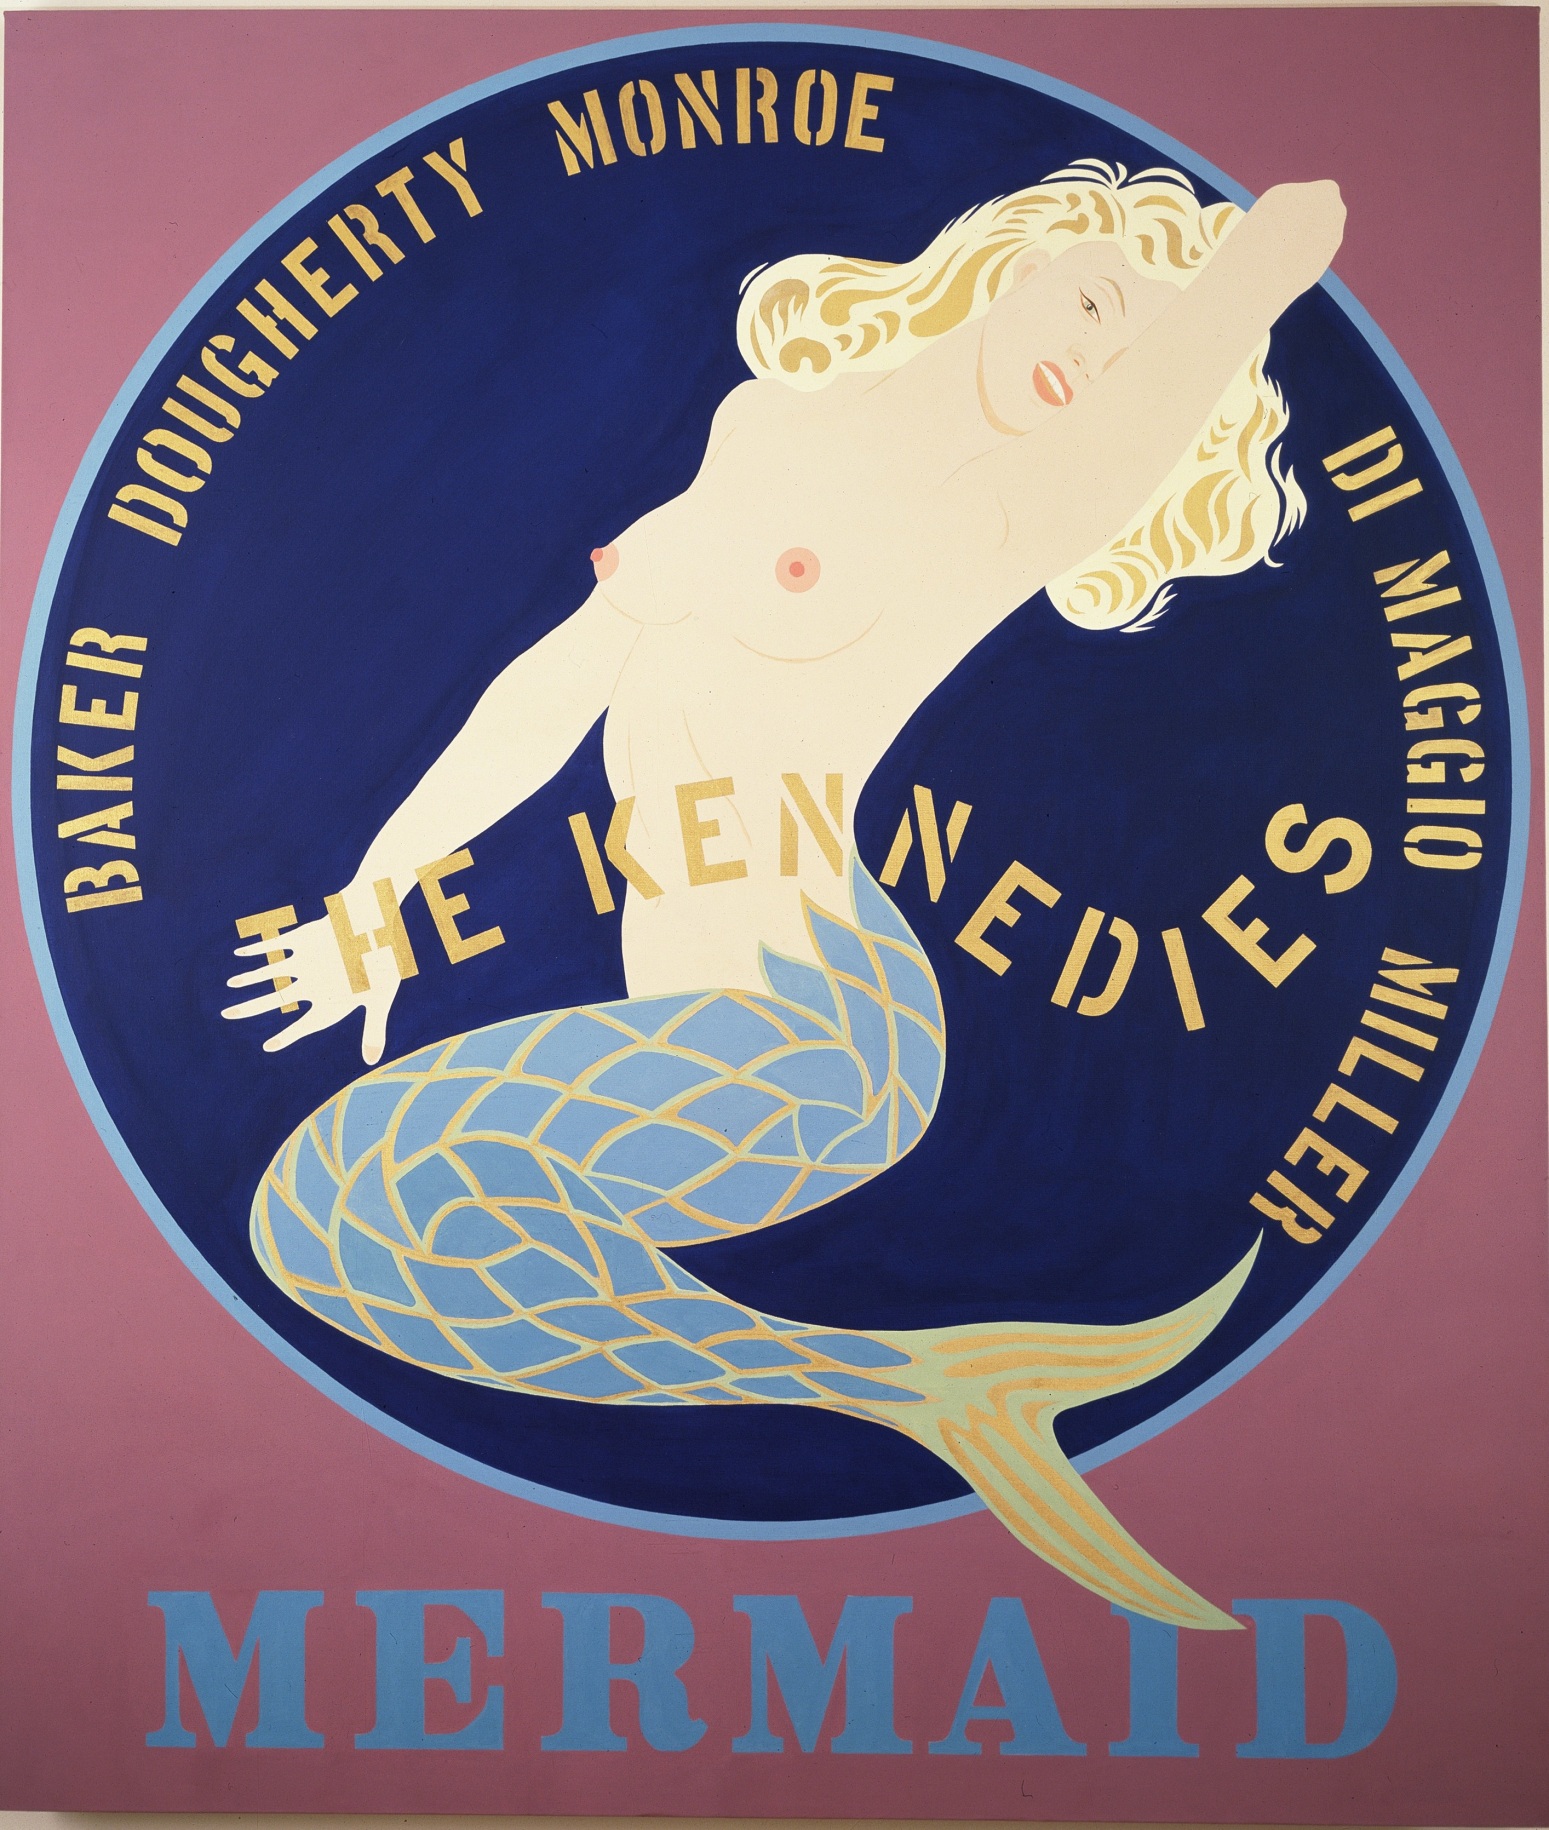 A 70 by 60 inch dusty rose canvas with the painting's title, Mermaid, painted in blue letters across the bottom. The work is dominated by a large blue circle with a light blue outline. In the circe is a topless Monroe featured as a mermaid, part of the tail extends beyond the circle. In the left part of the circle the names Baker, Dougherty, and Monroe are painted in yellow. In the right the names Di Maggio and Miller are painted in yellow. Across the center of the circle, over the image of Monroe, &quot;The Kennedies&quot; is painted in yellow letters.